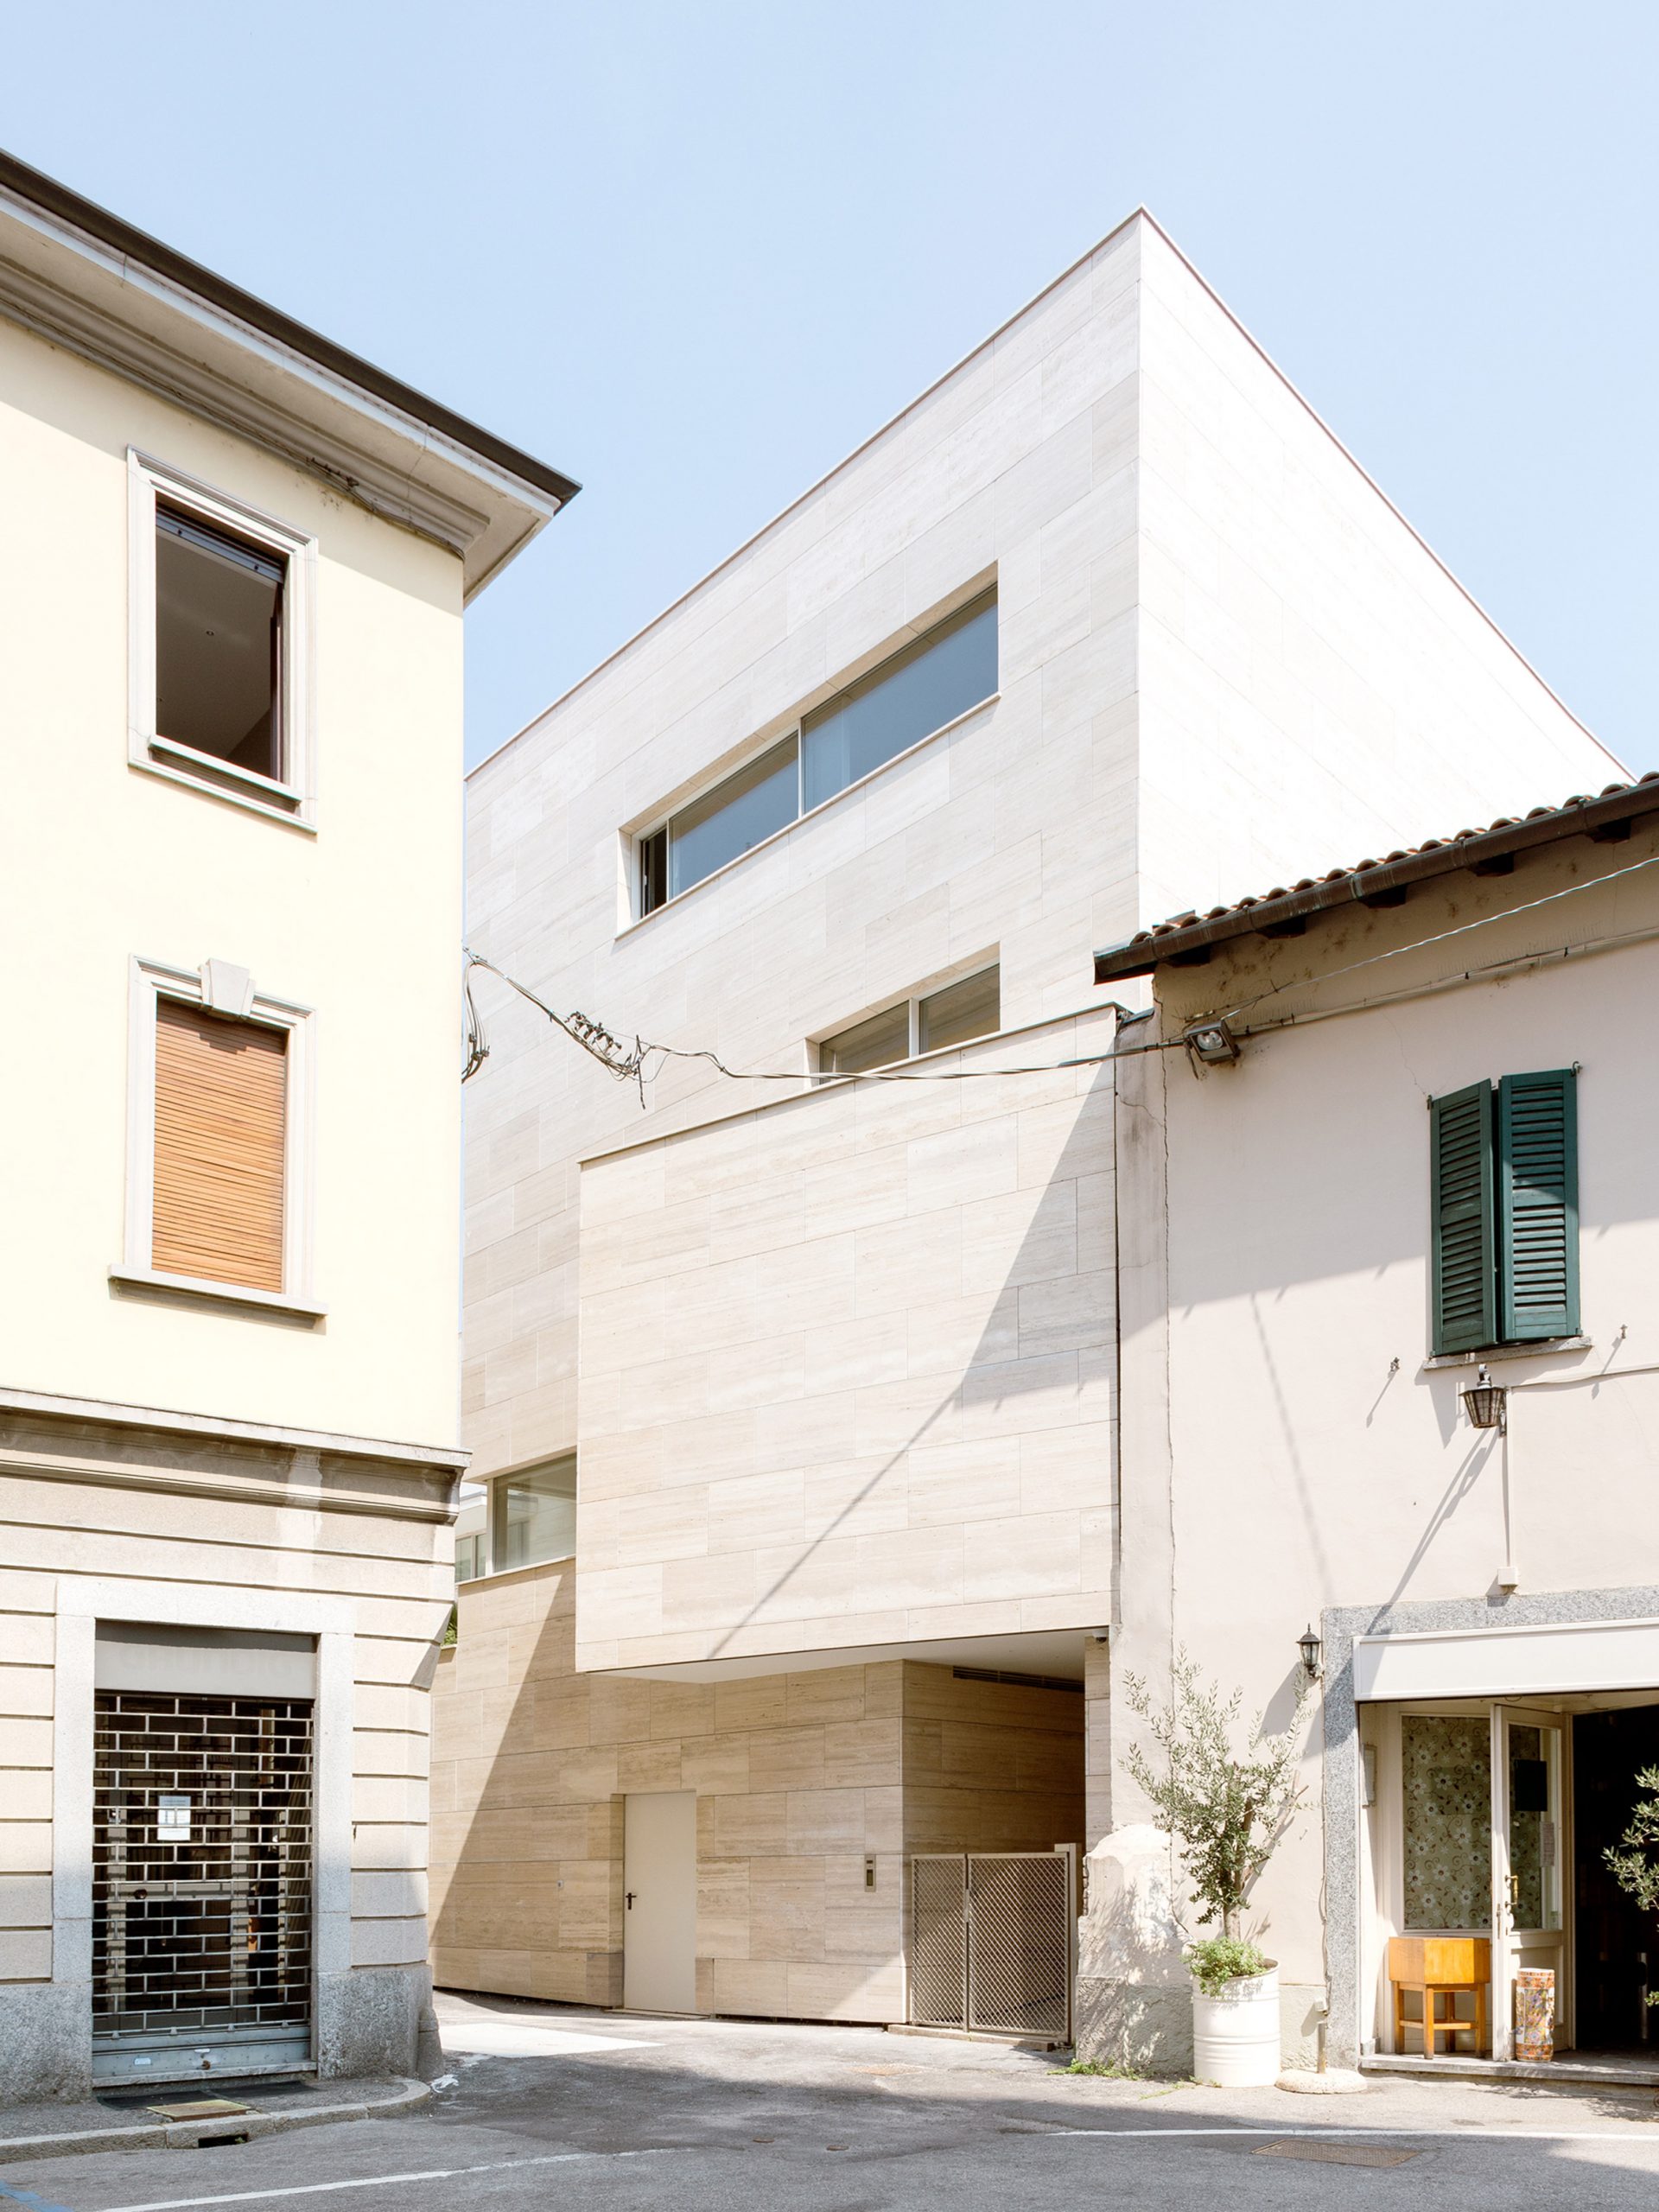 Housing by Álvaro Siza and COR Arquitectos in Gallarate